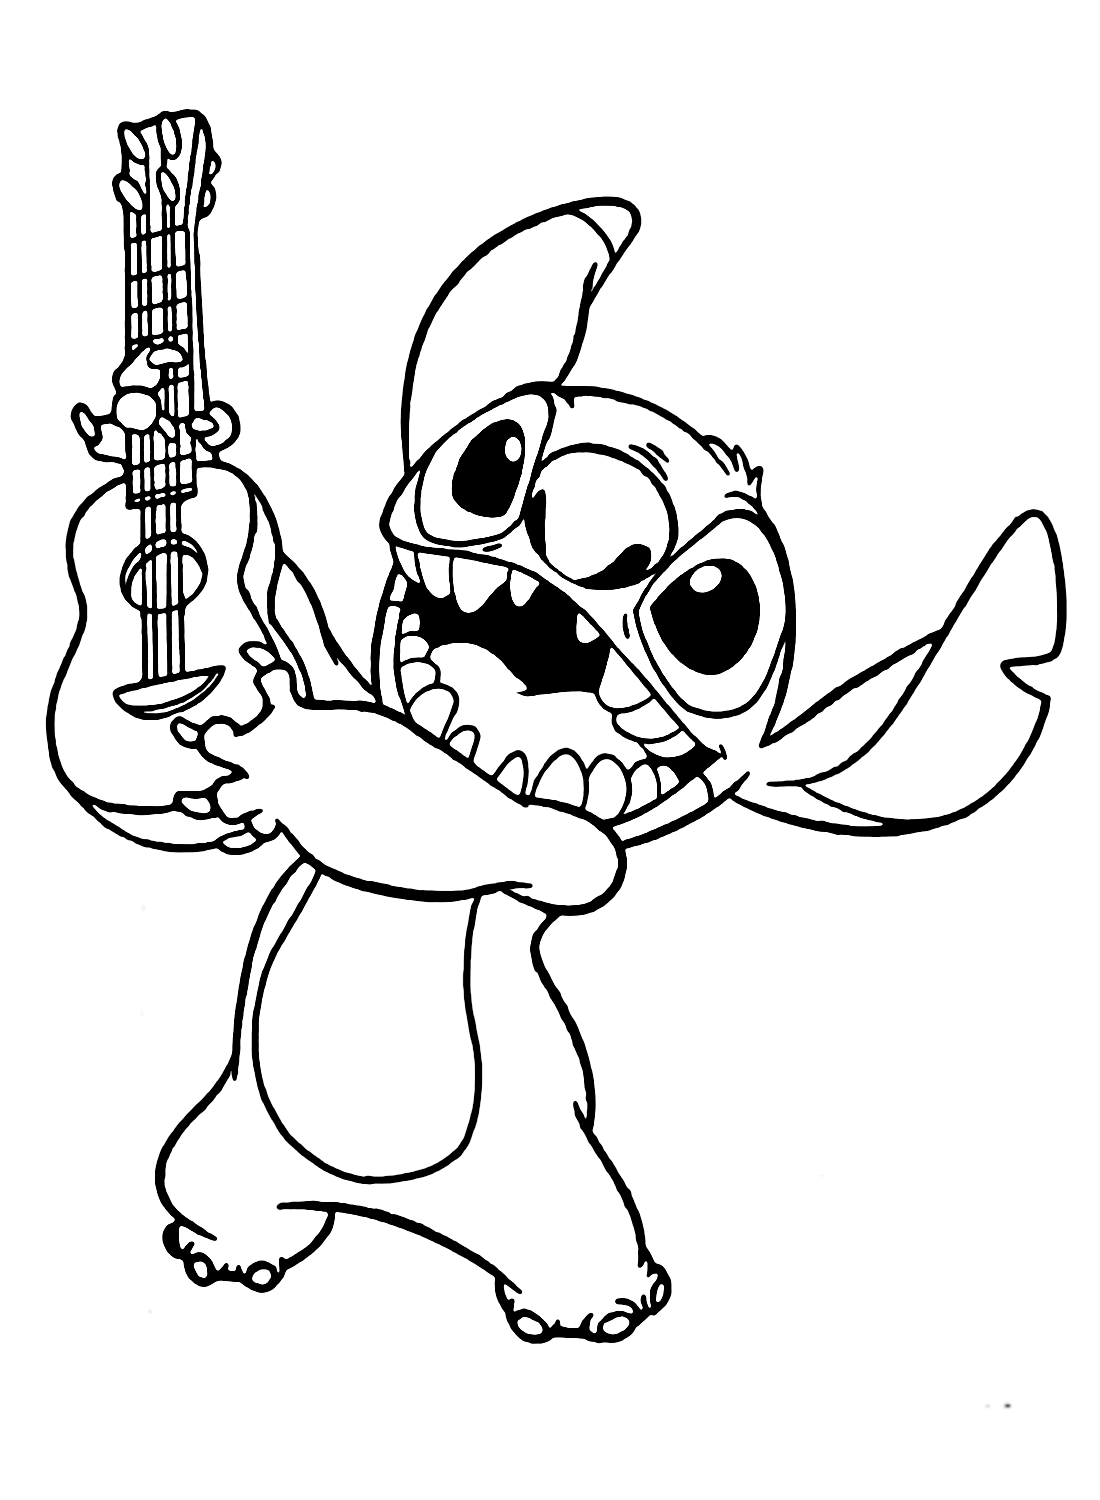 Adorable Stitch Coloring Page Coloring Page